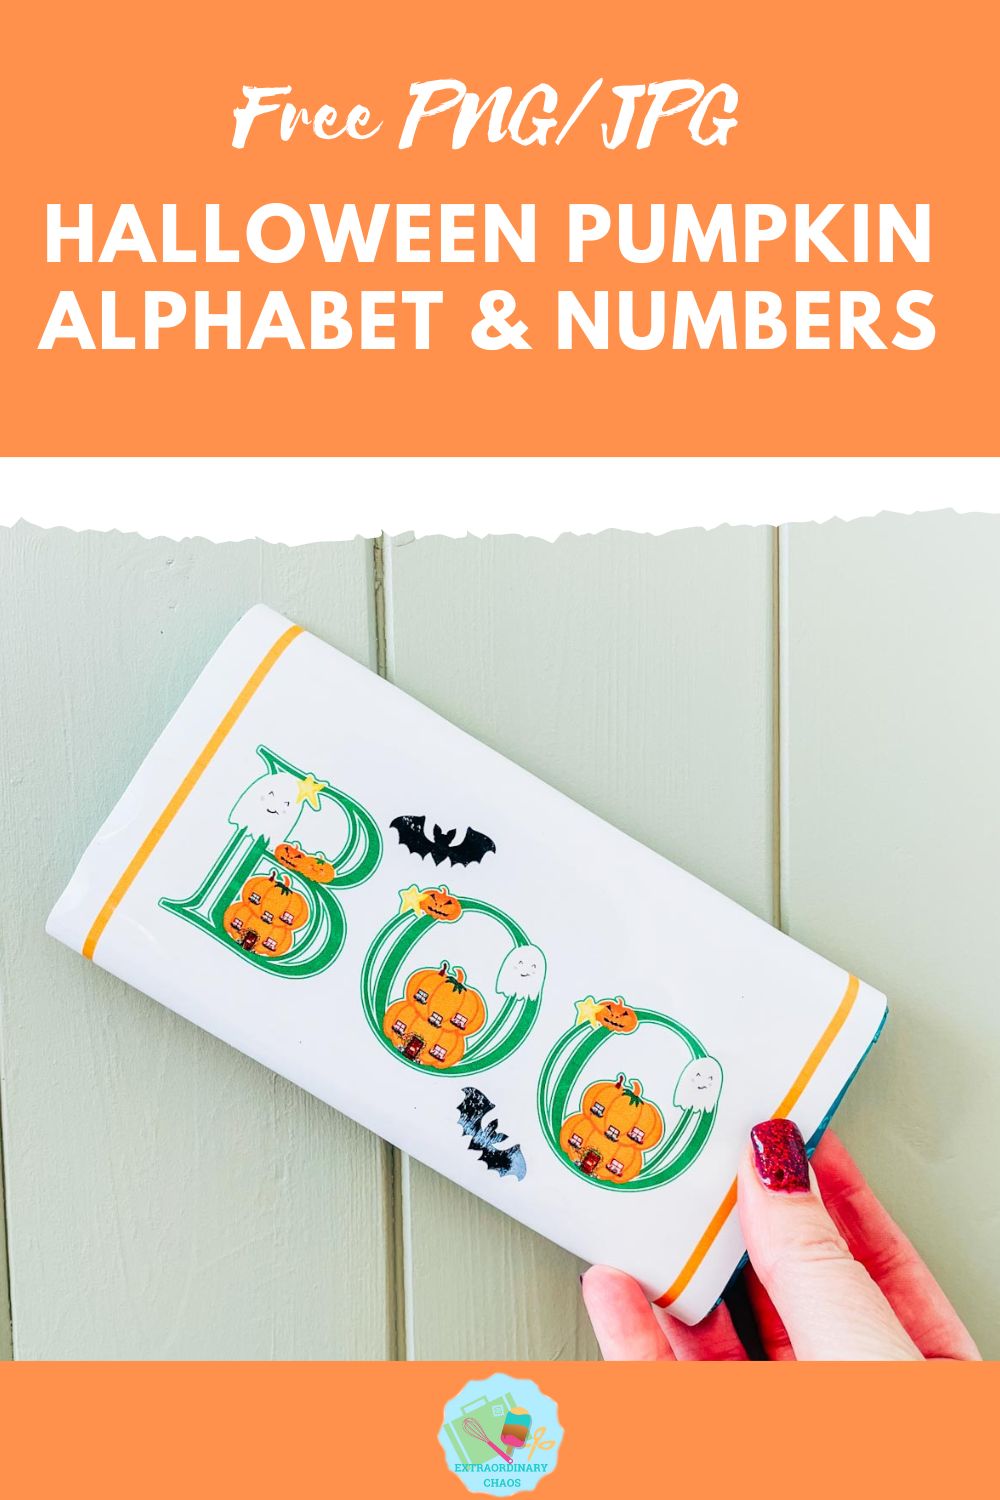 Free Halloween pumpkin printable letters and numbers png and jpg for print and cut